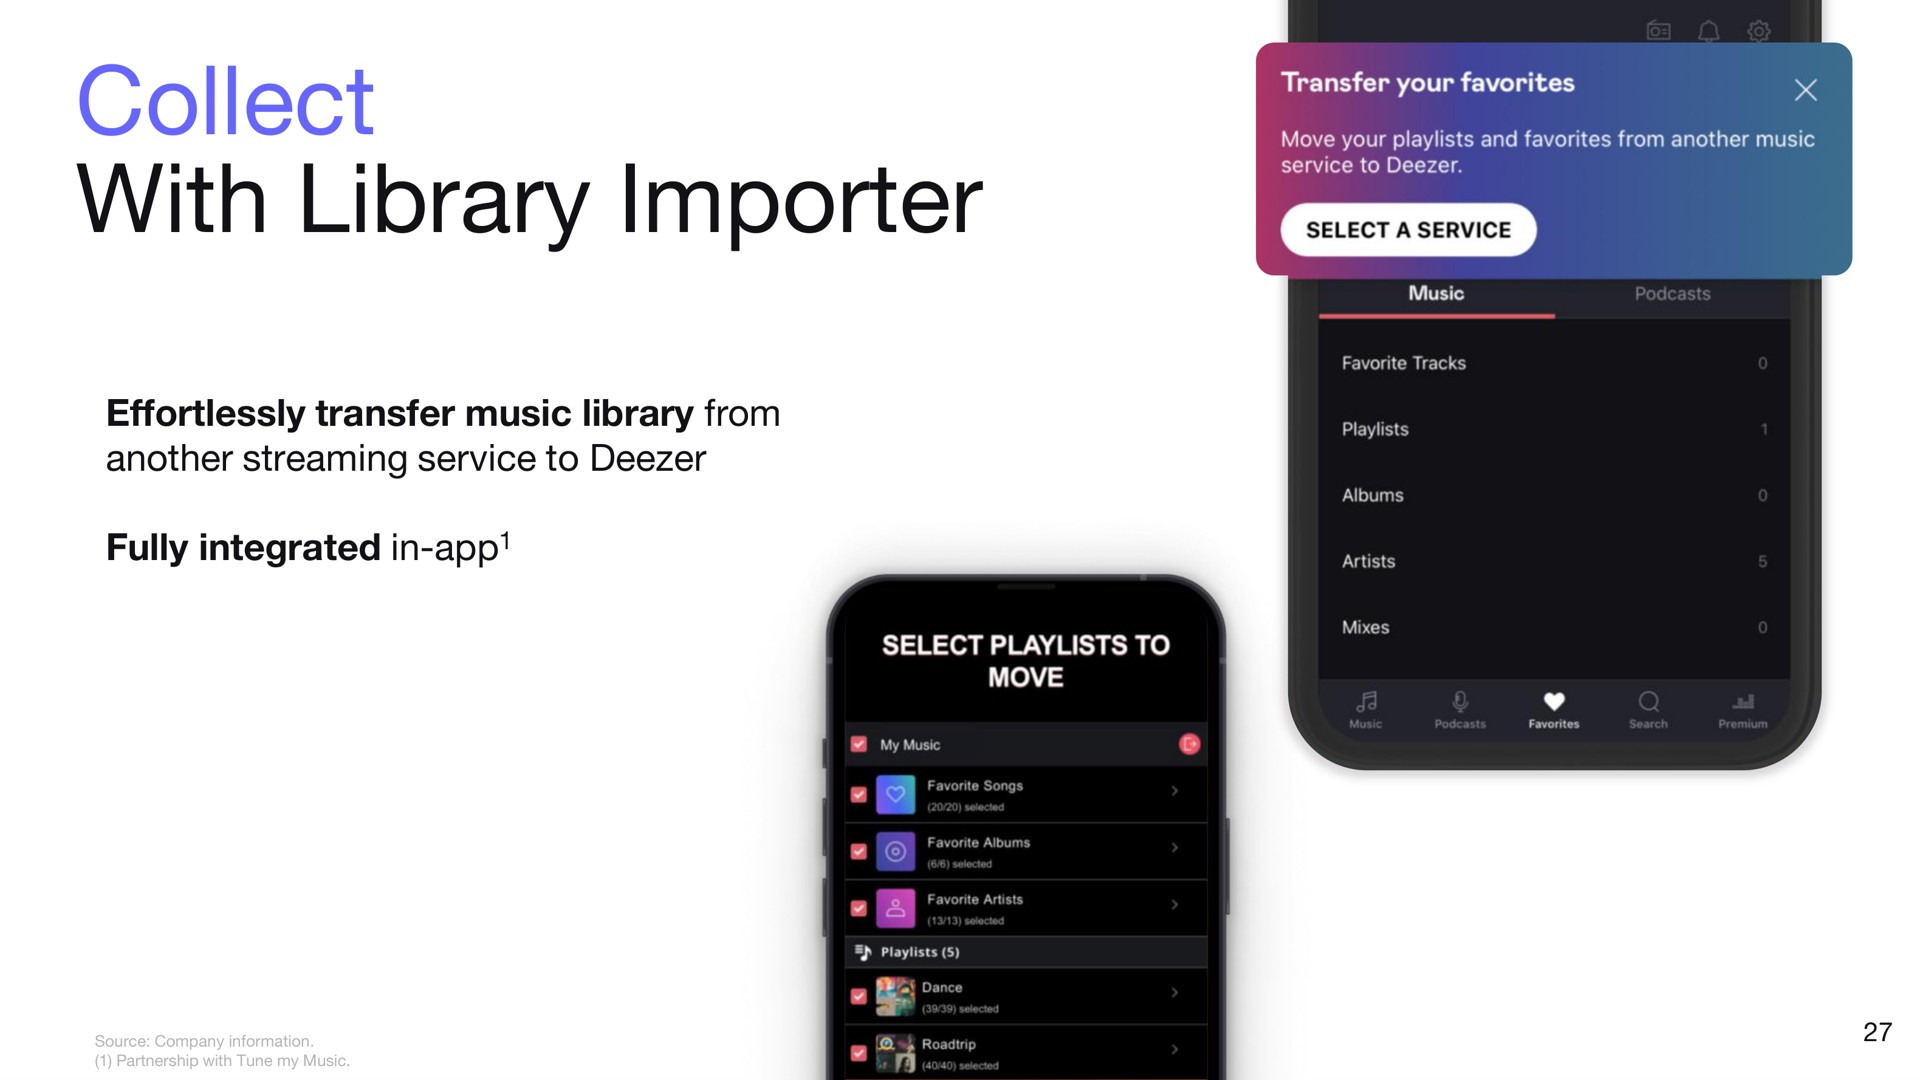 collect with library importer | Deezer